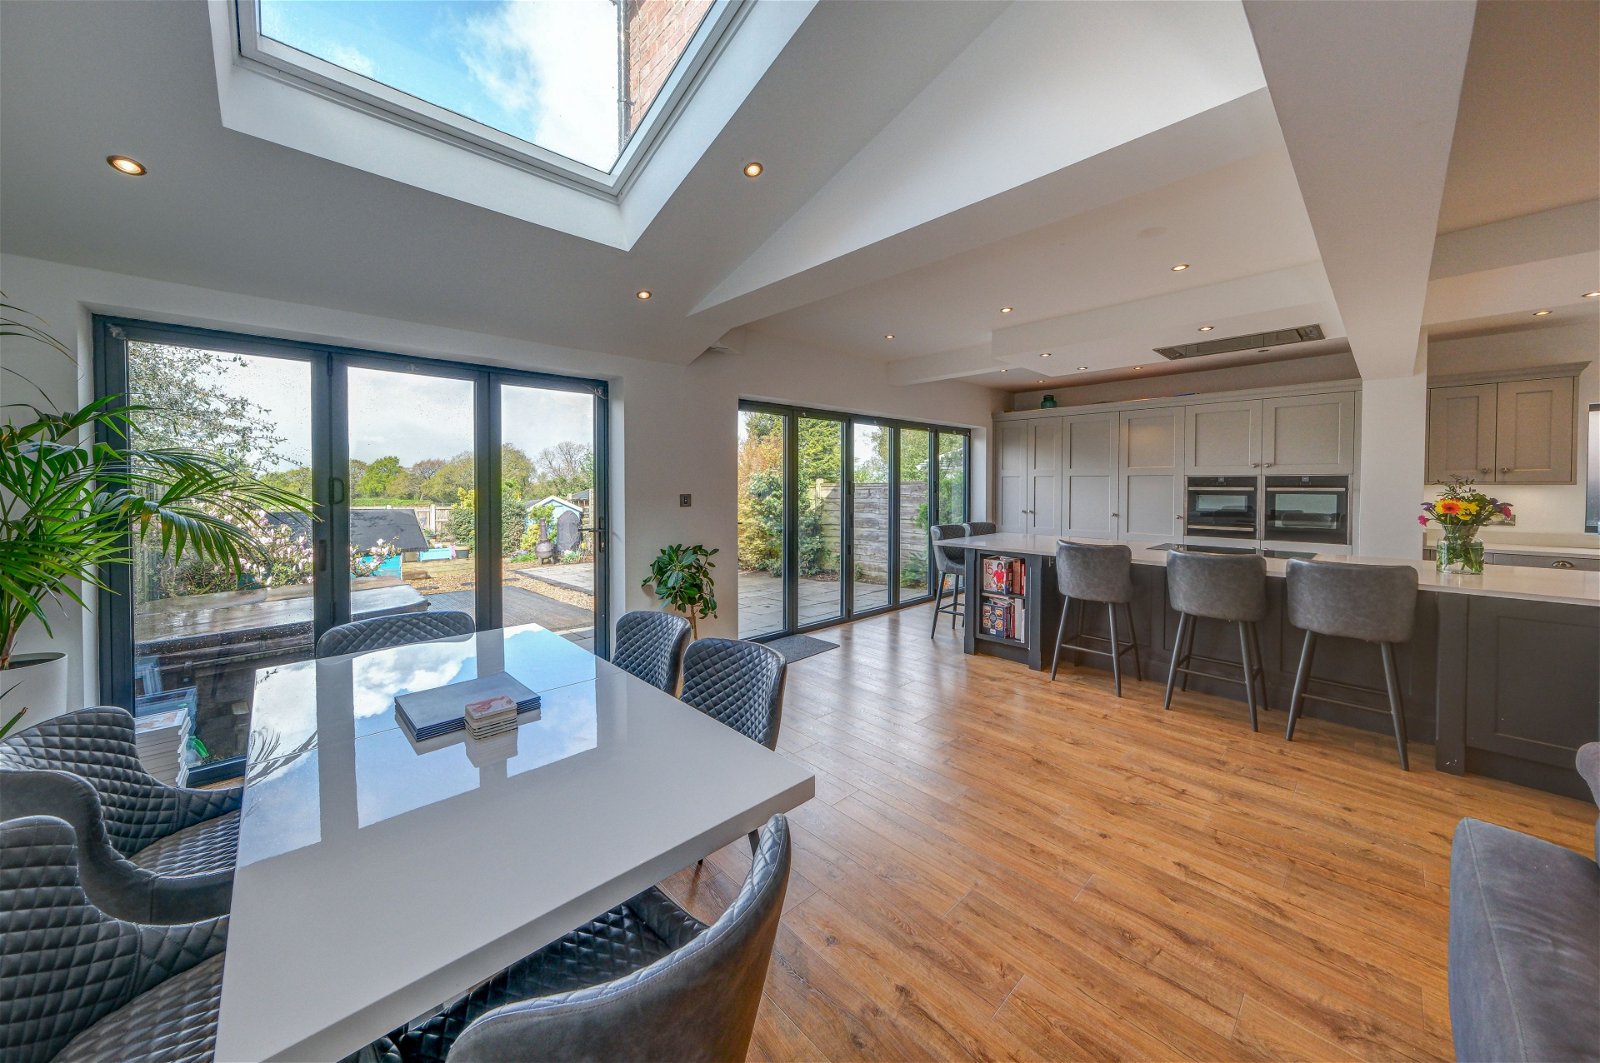 Lymm, Cheshire, 5 bedrooms - Kitchens